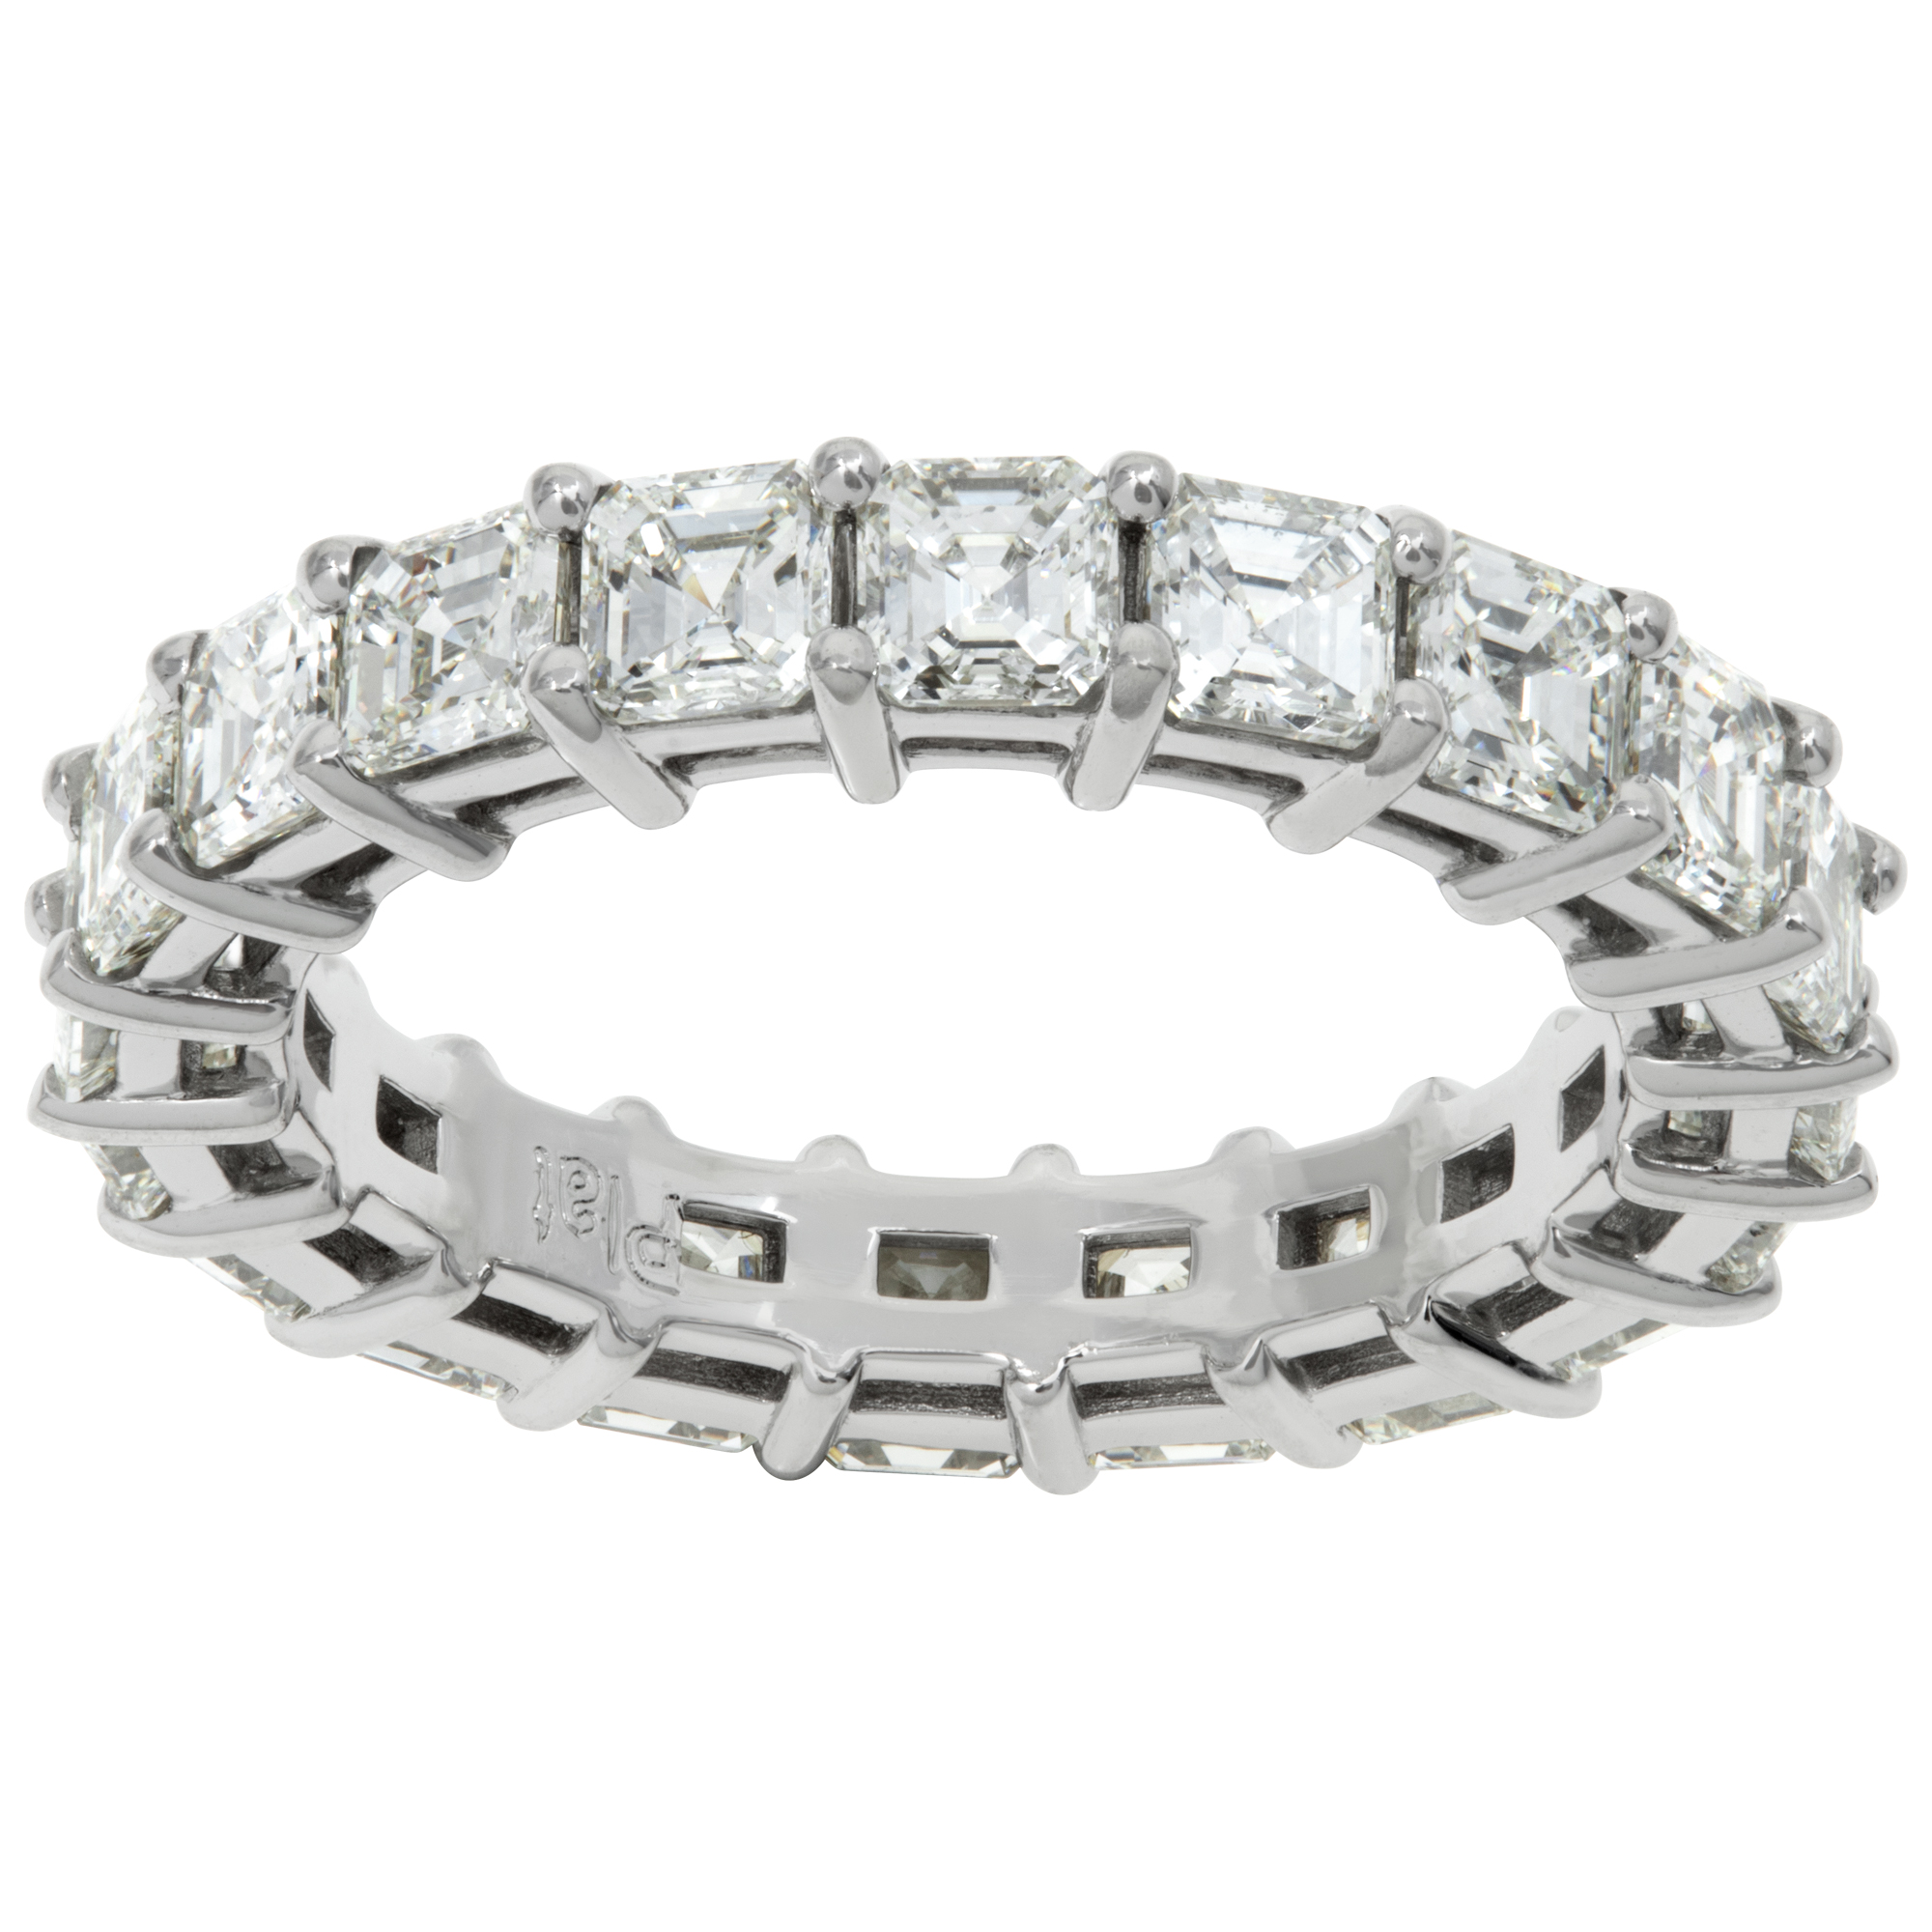 Ascher cut diamond eternity band in platinum with approximately 4.00 carats in diamonds. Size 6 image 1